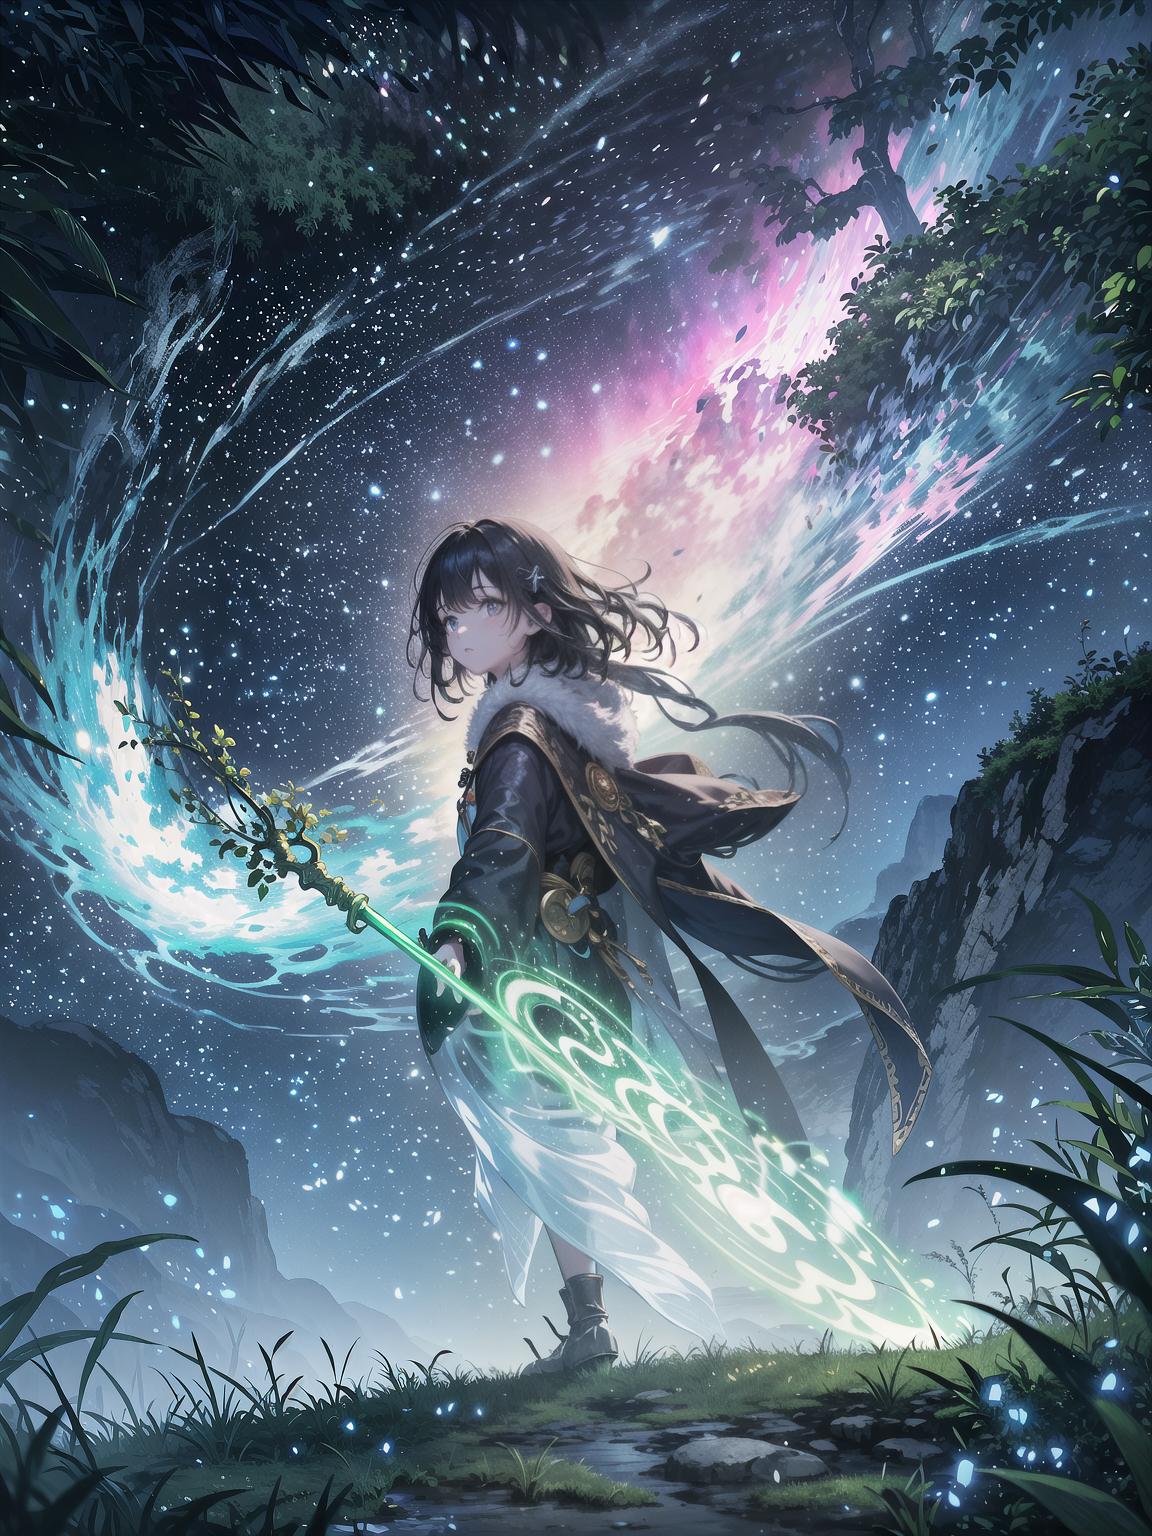  master piece, best quality, ultra detailed, highres, 4k.8k, Young girl with nature spirit, Exploring with nature spirit, harmonizing with nature, Determined, connected to nature, BREAK Girl with Nature Spirit, Enchanted forest clearing, Mystical staff, glowing crystals, lush flora, magical animals, BREAK Serene, mystical, vibrant with life, Subtle ethereal glow, nature energy swirling around, starry,strry light,night,colorful,cloud